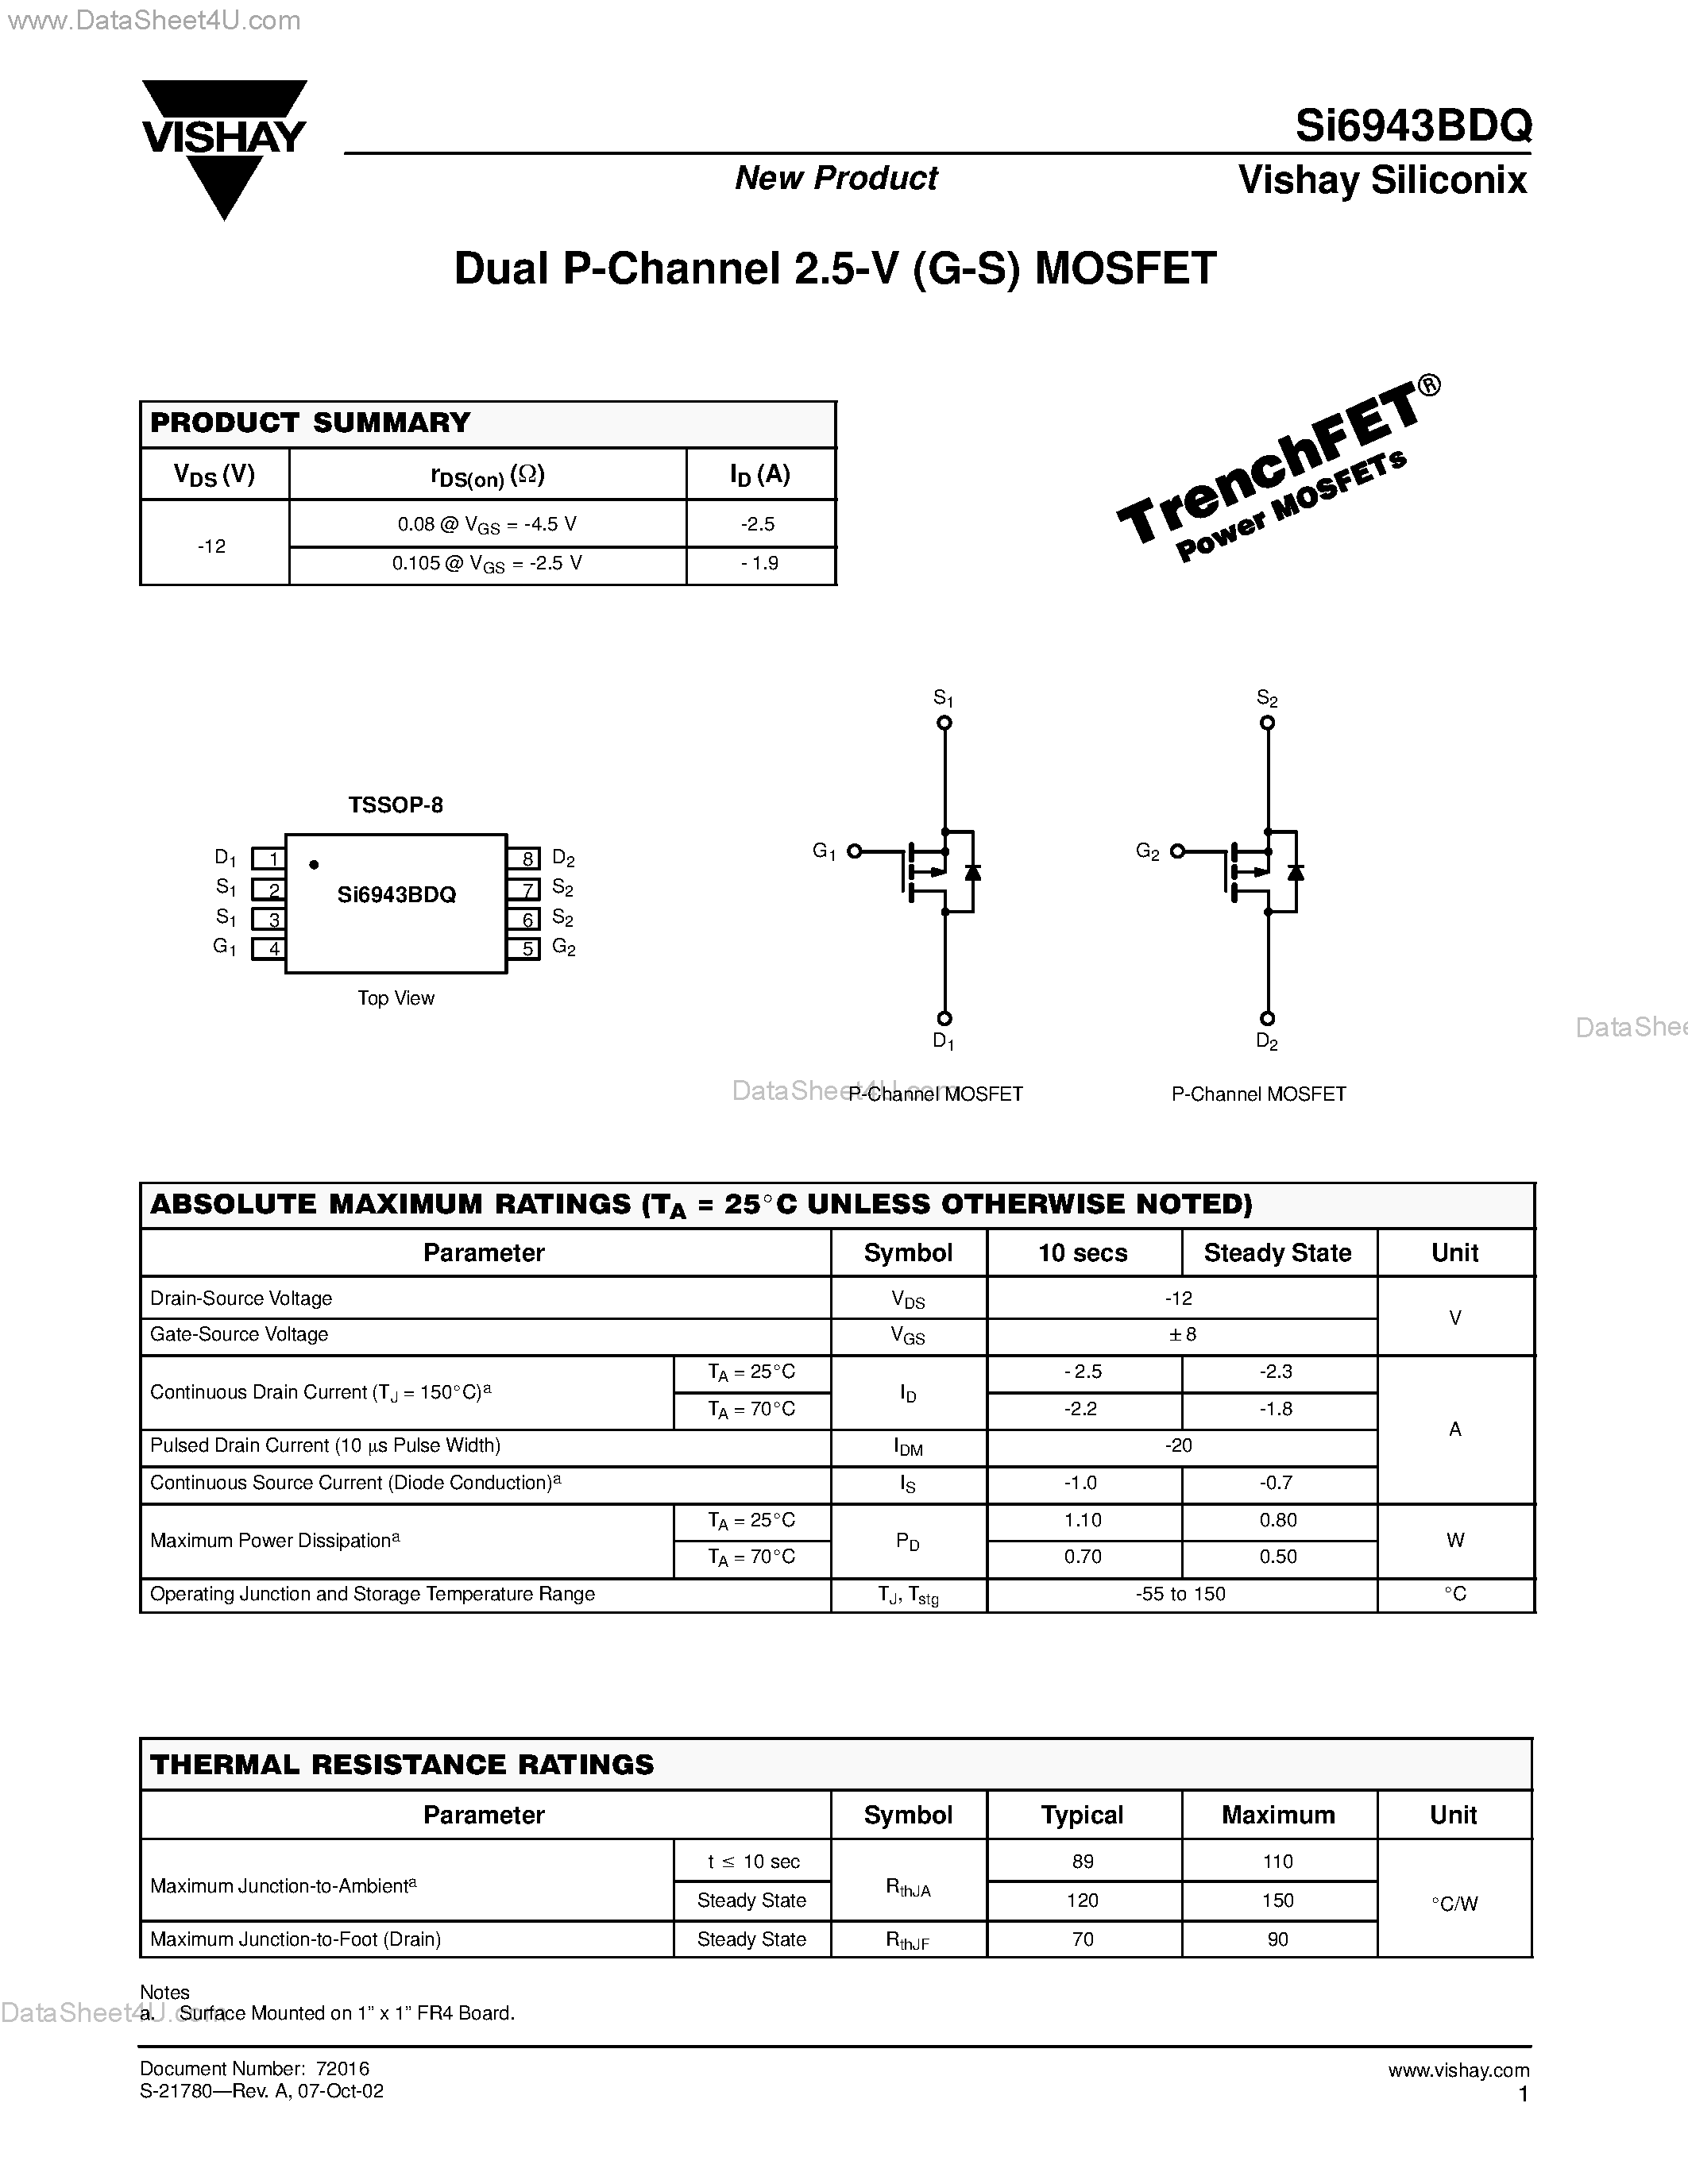 Даташит SI6943BDQ - Dual P-Channel 2.5-V (G-S) MOSFET страница 1